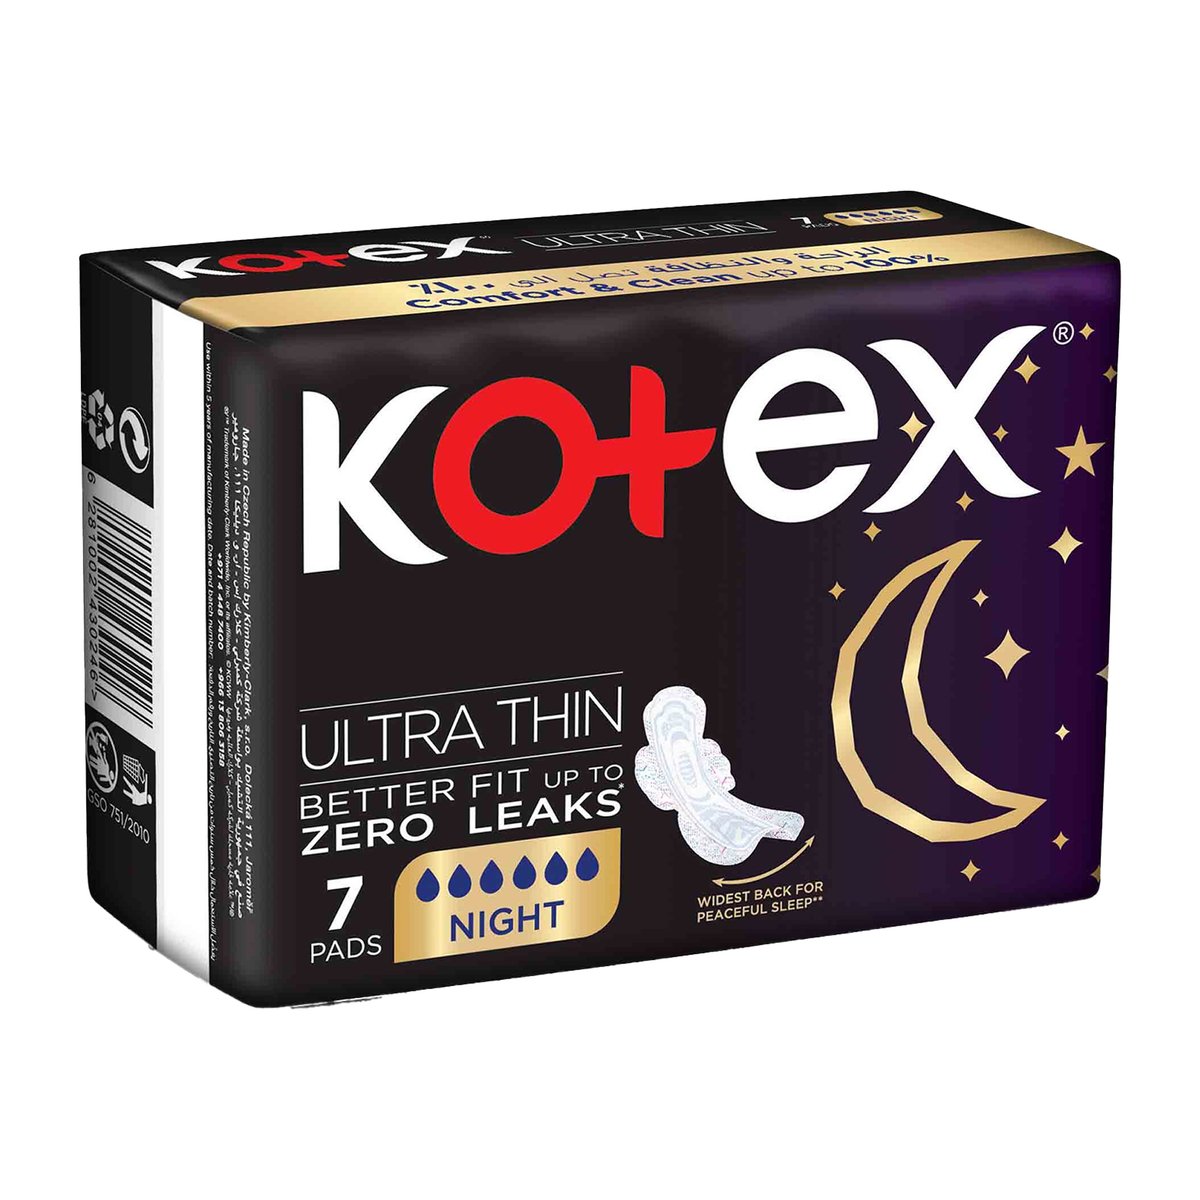 Kotex Ultra Thin Overnight Protection Sanitary Pads with Wings 7 pcs